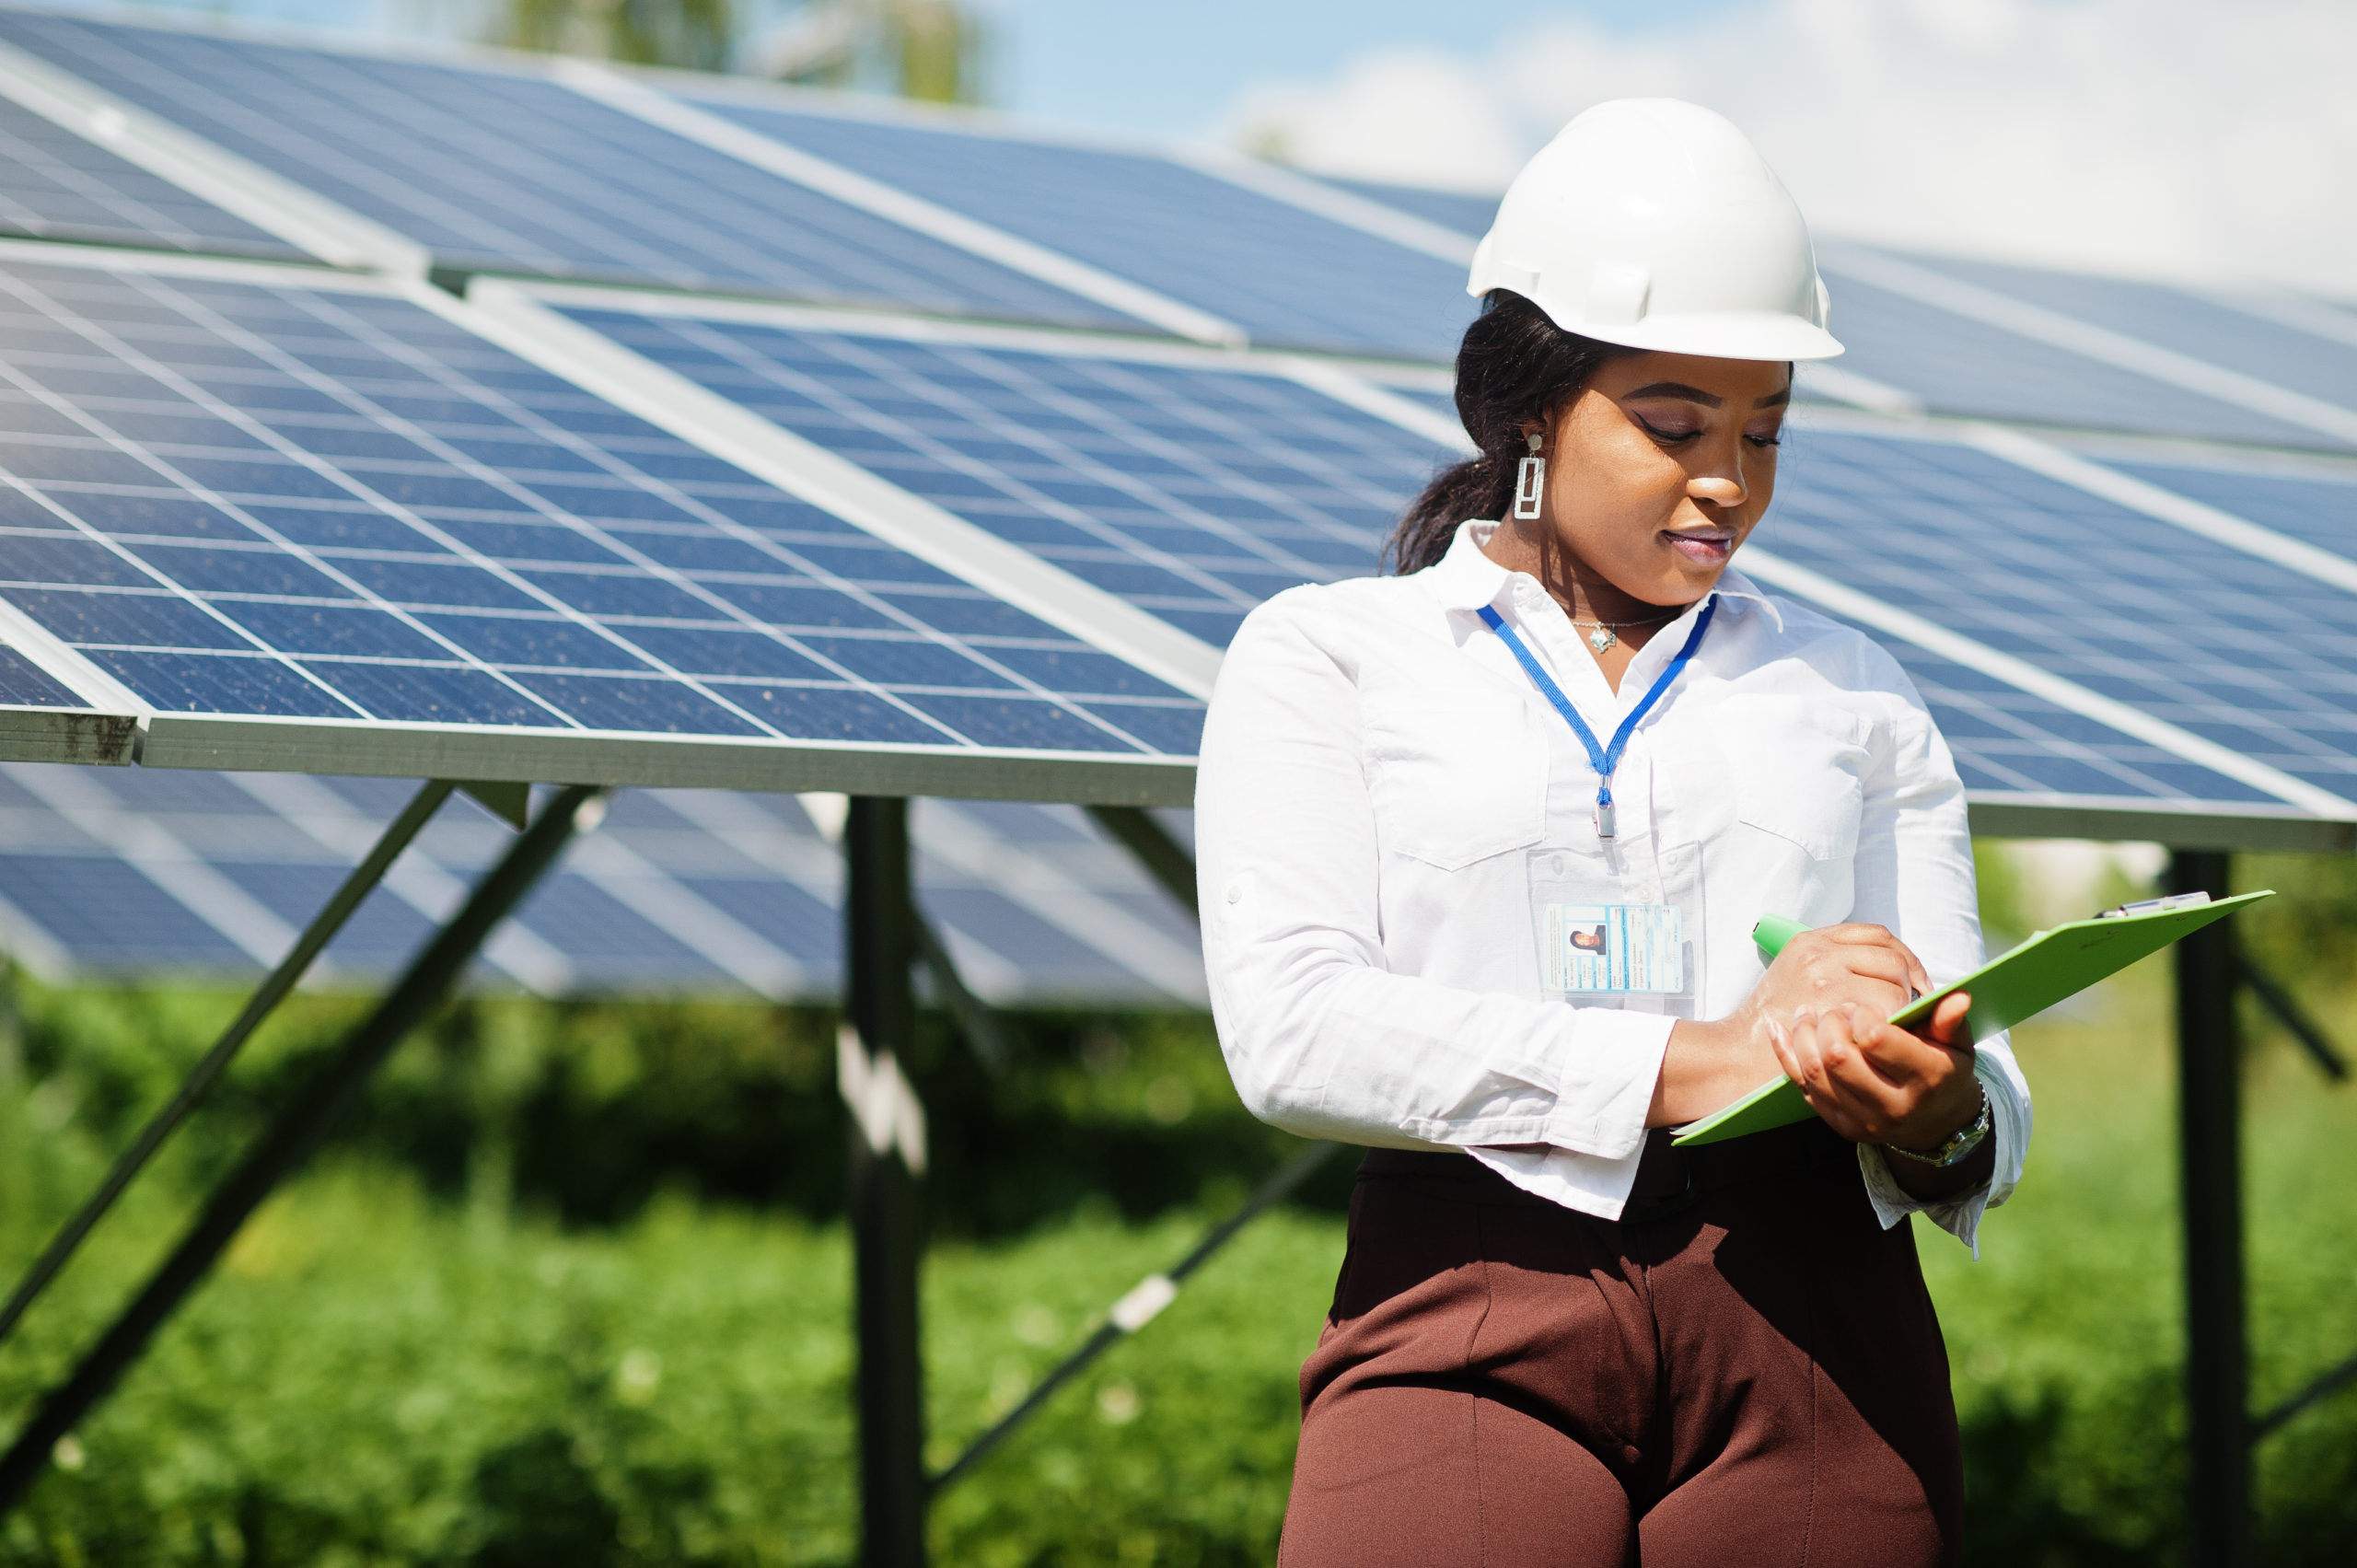 Smart Grid: A woman stands in front of solar panels with a clip board